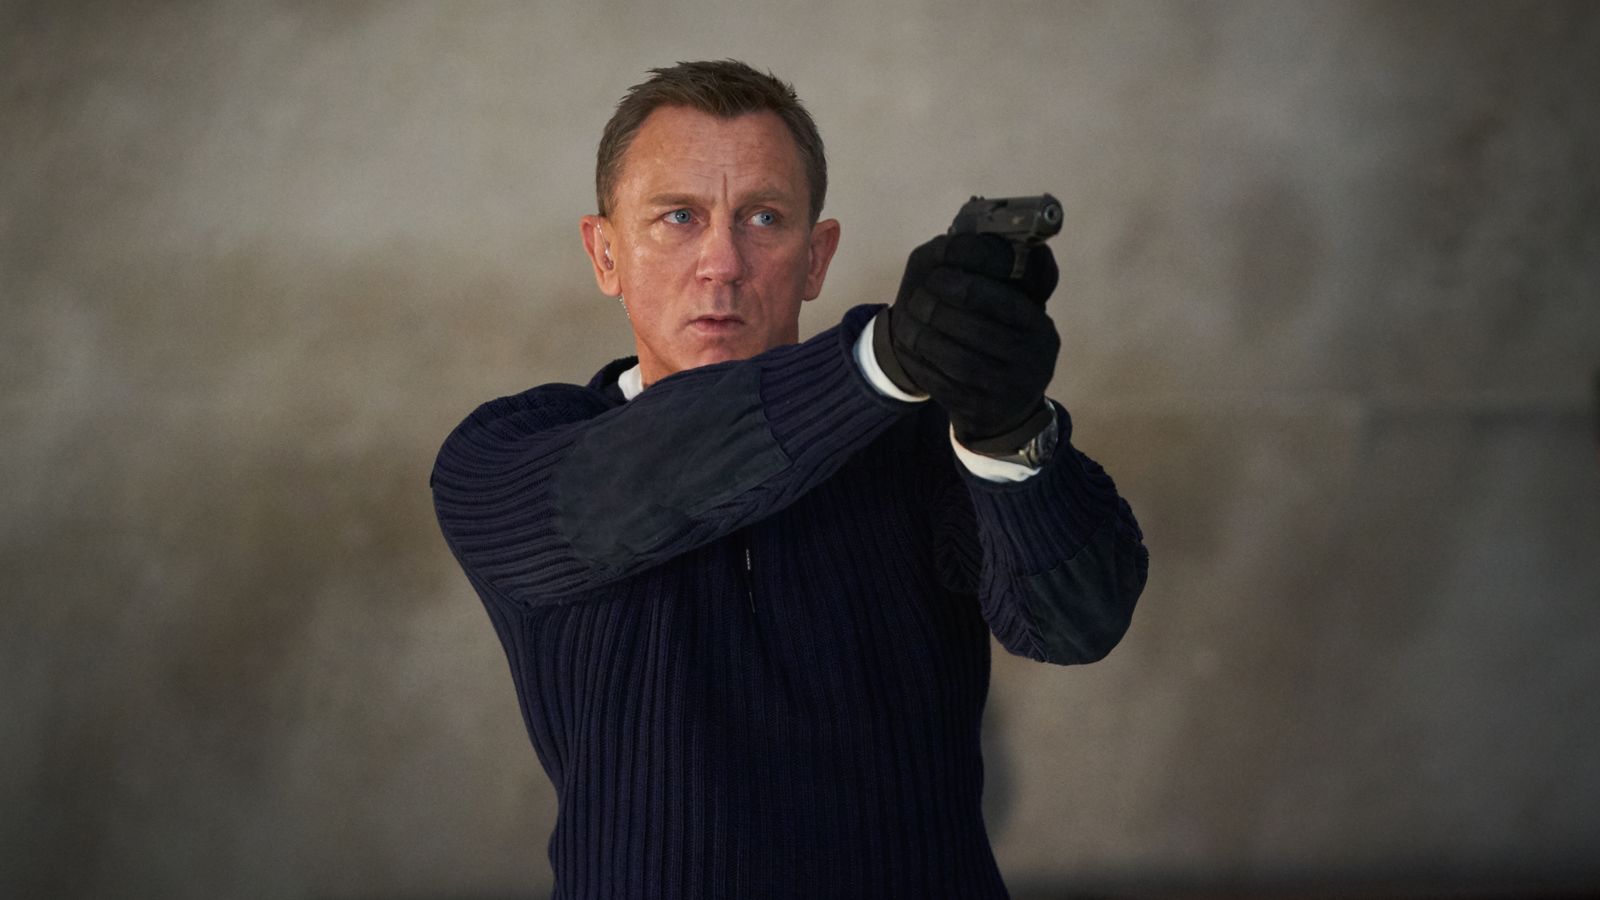 James Bond: No Time To Die becomes Hollywood's biggest international release of pandemic